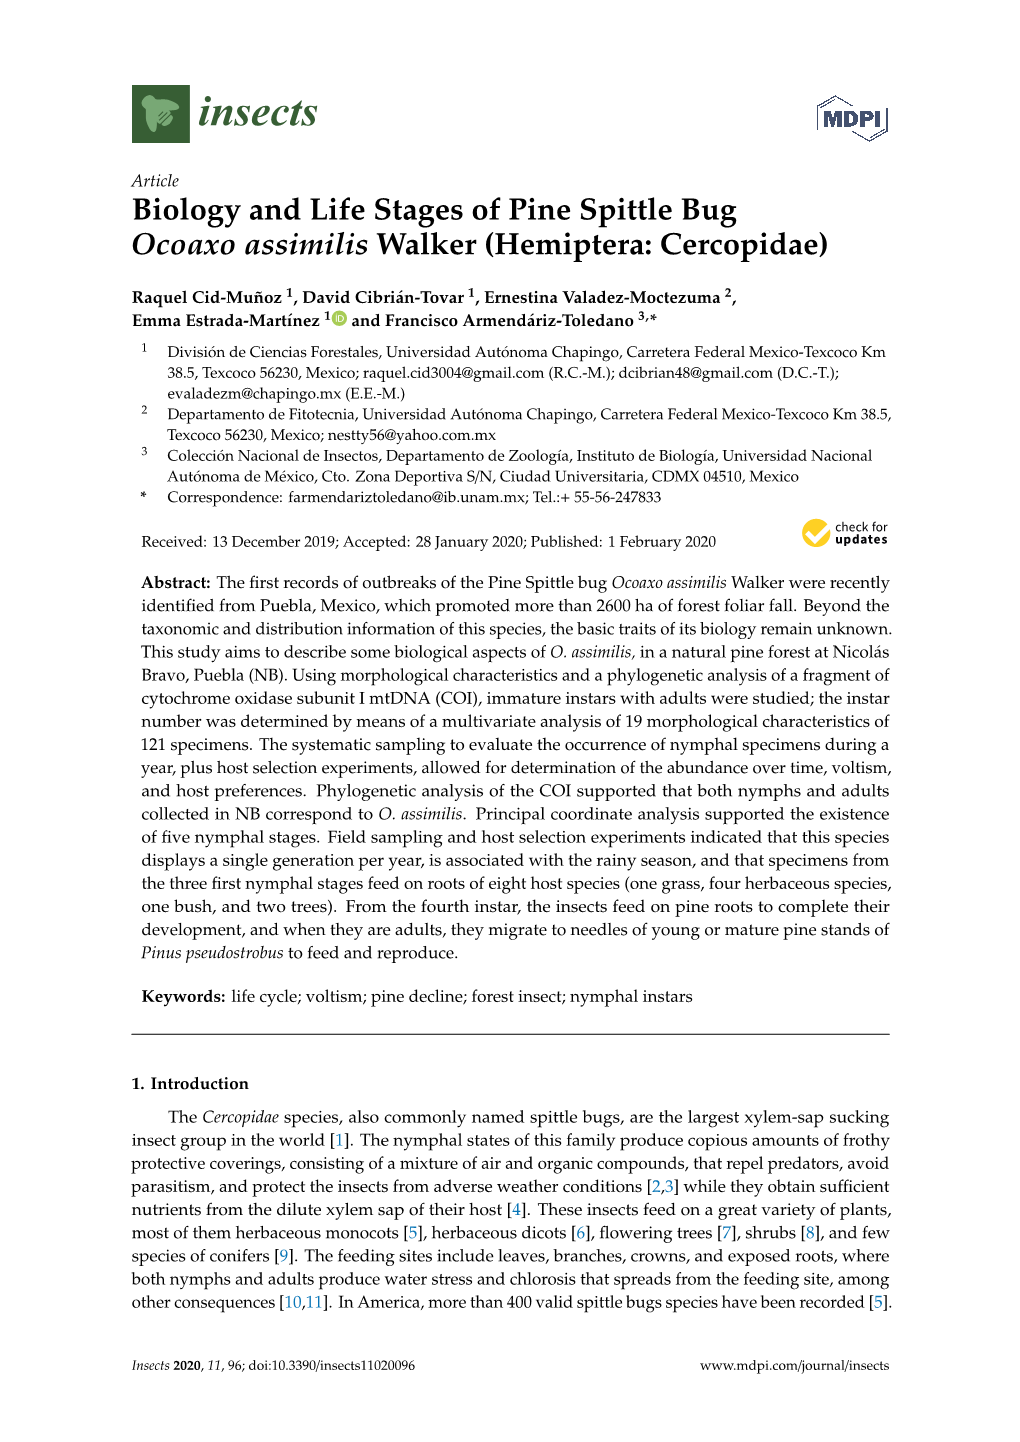 Biology and Life Stages of Pine Spittle Bug Ocoaxo Assimilis Walker (Hemiptera: Cercopidae)